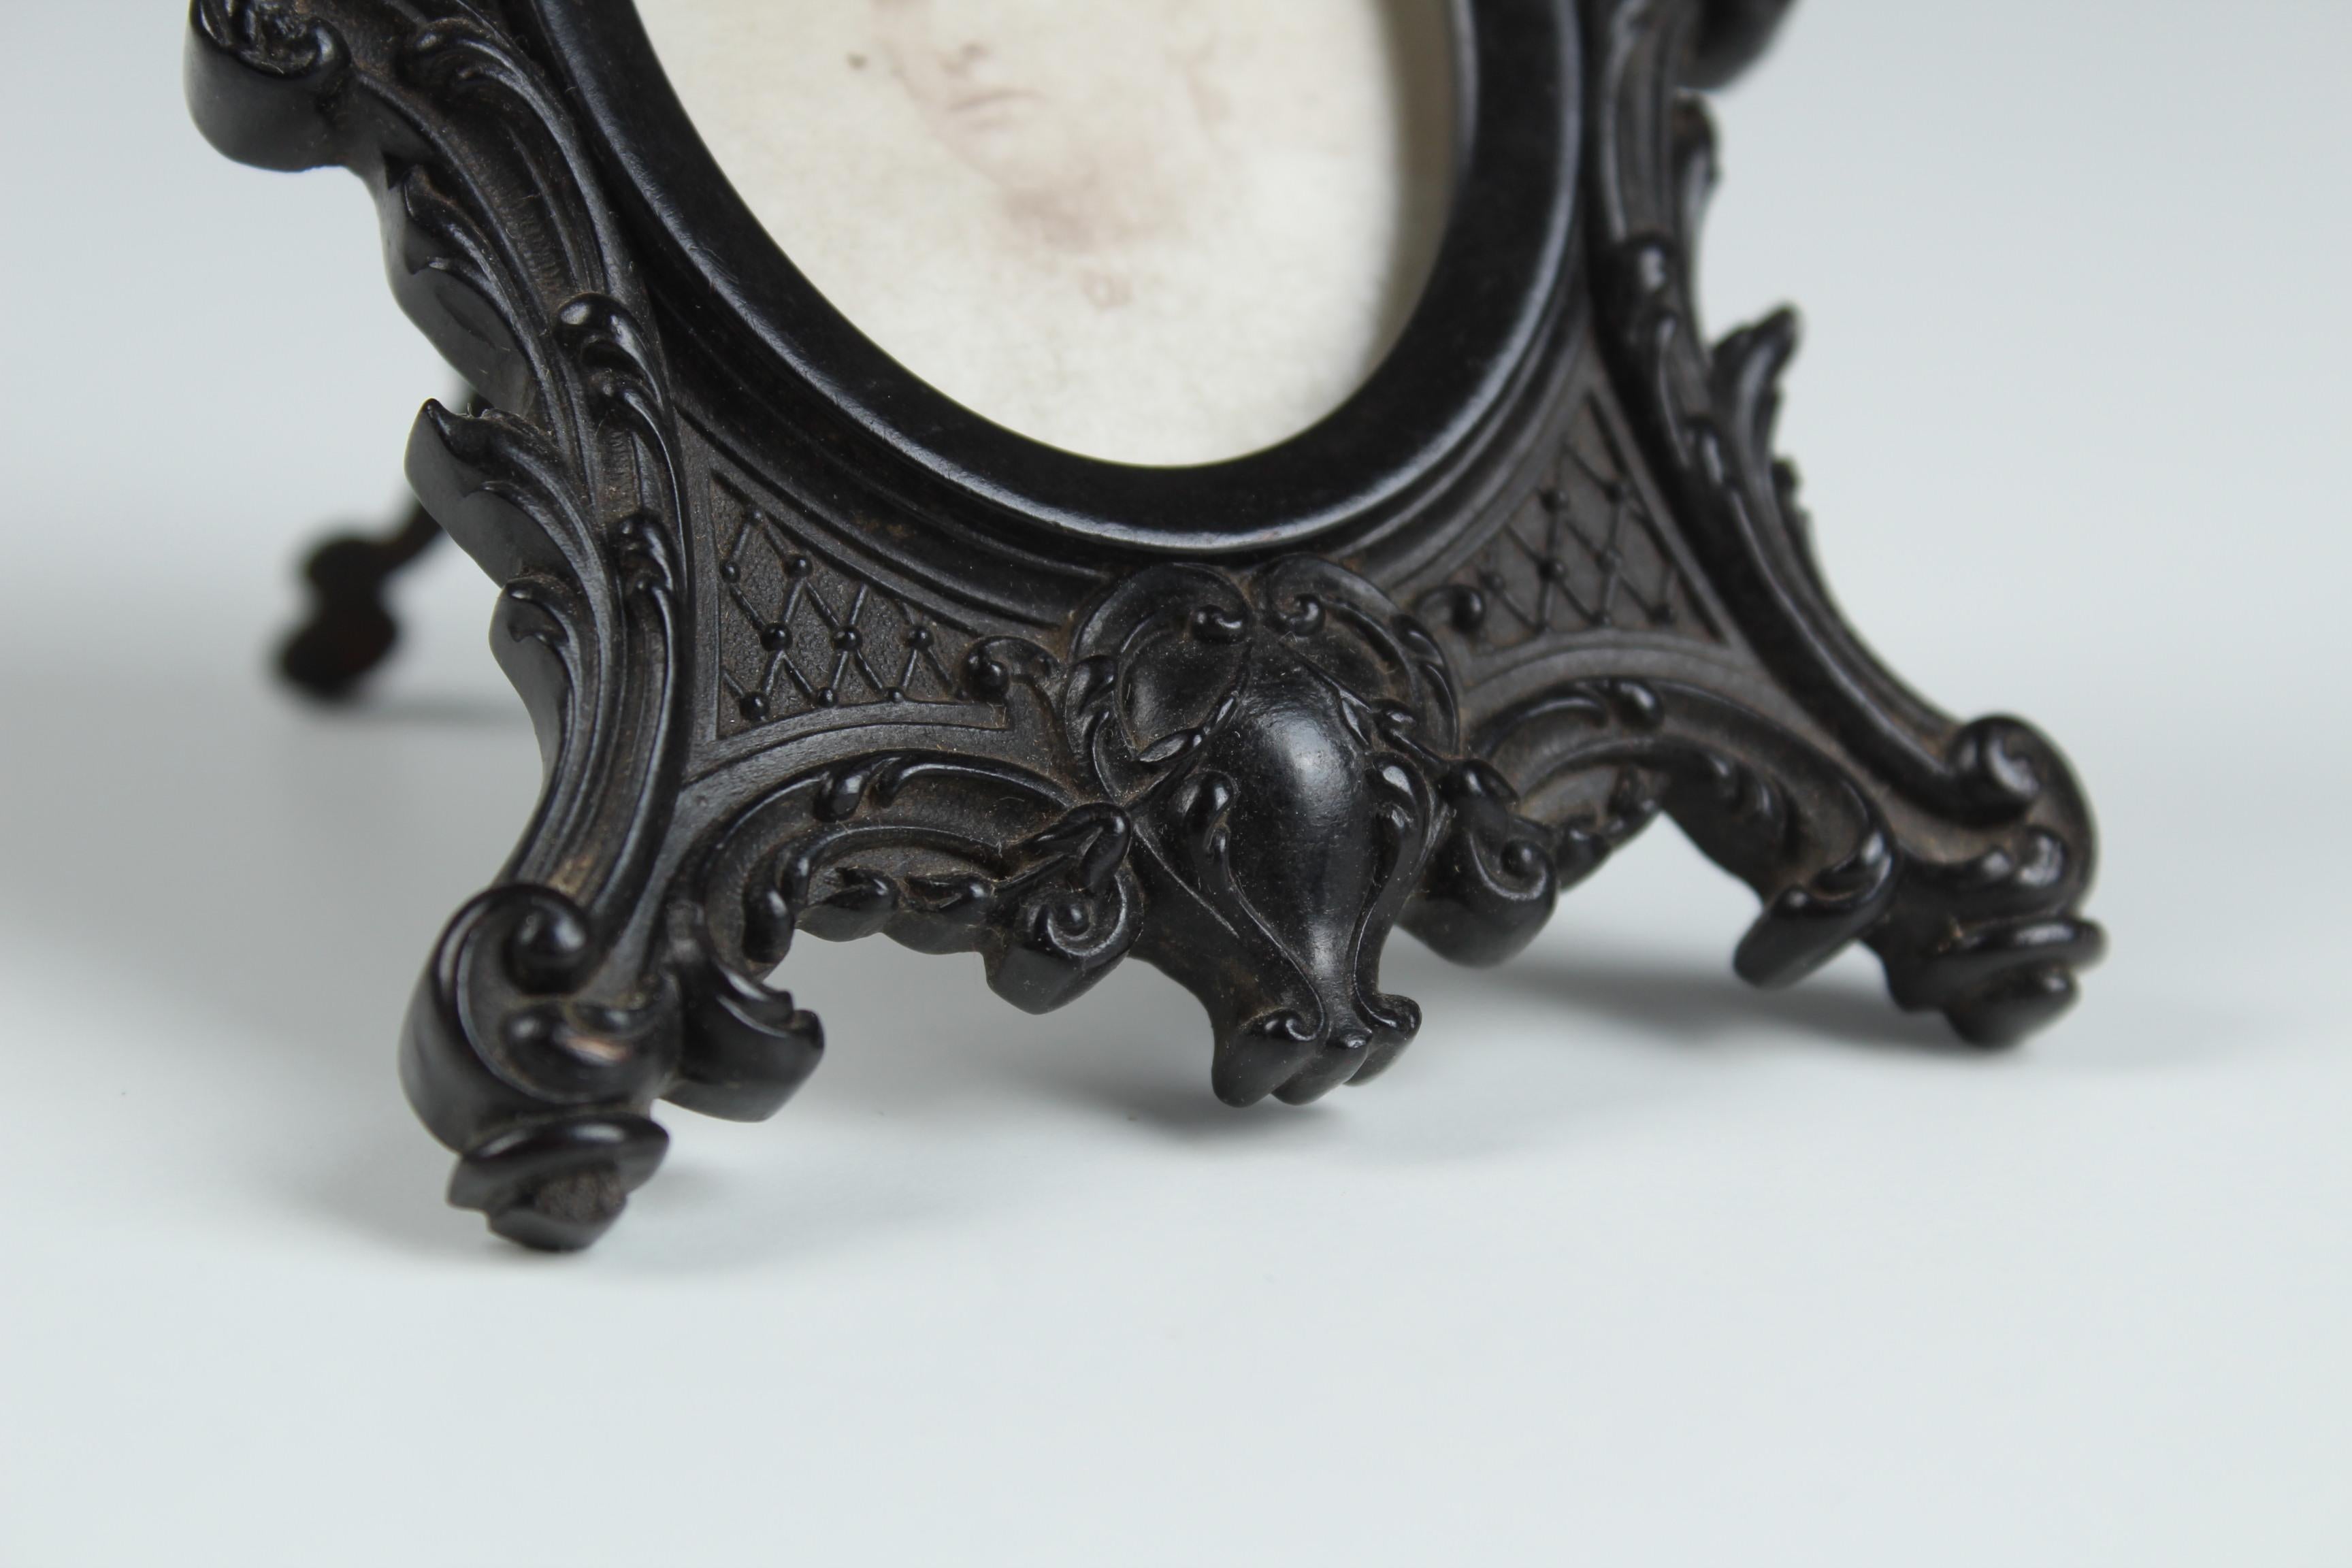 Beautiful picture frame from France circa 1880.
The antique Gutta Percha is in a very good condition.

